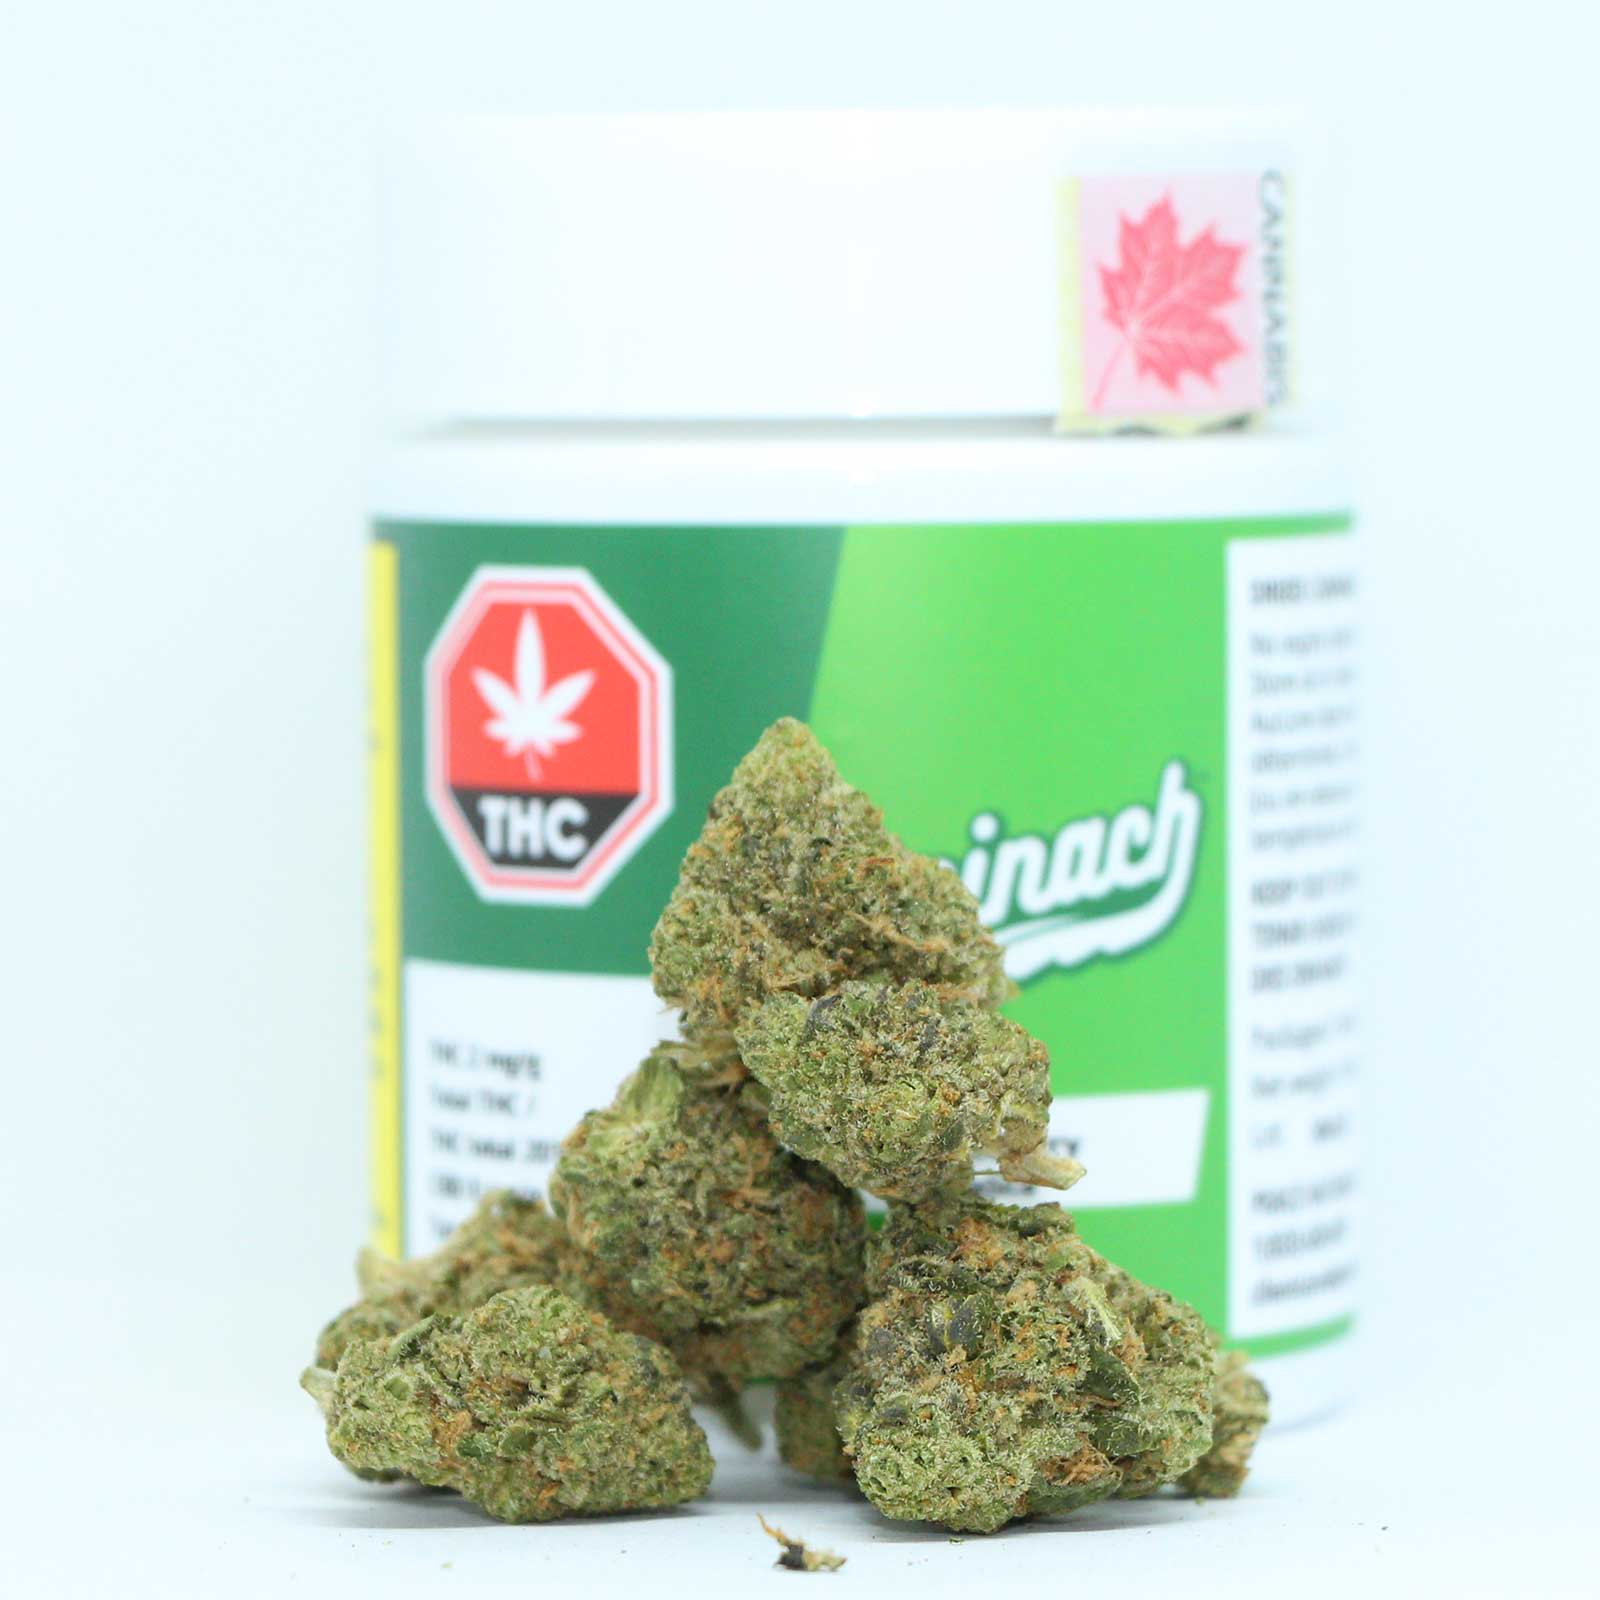 spinach blueberry review cannabis photos 2